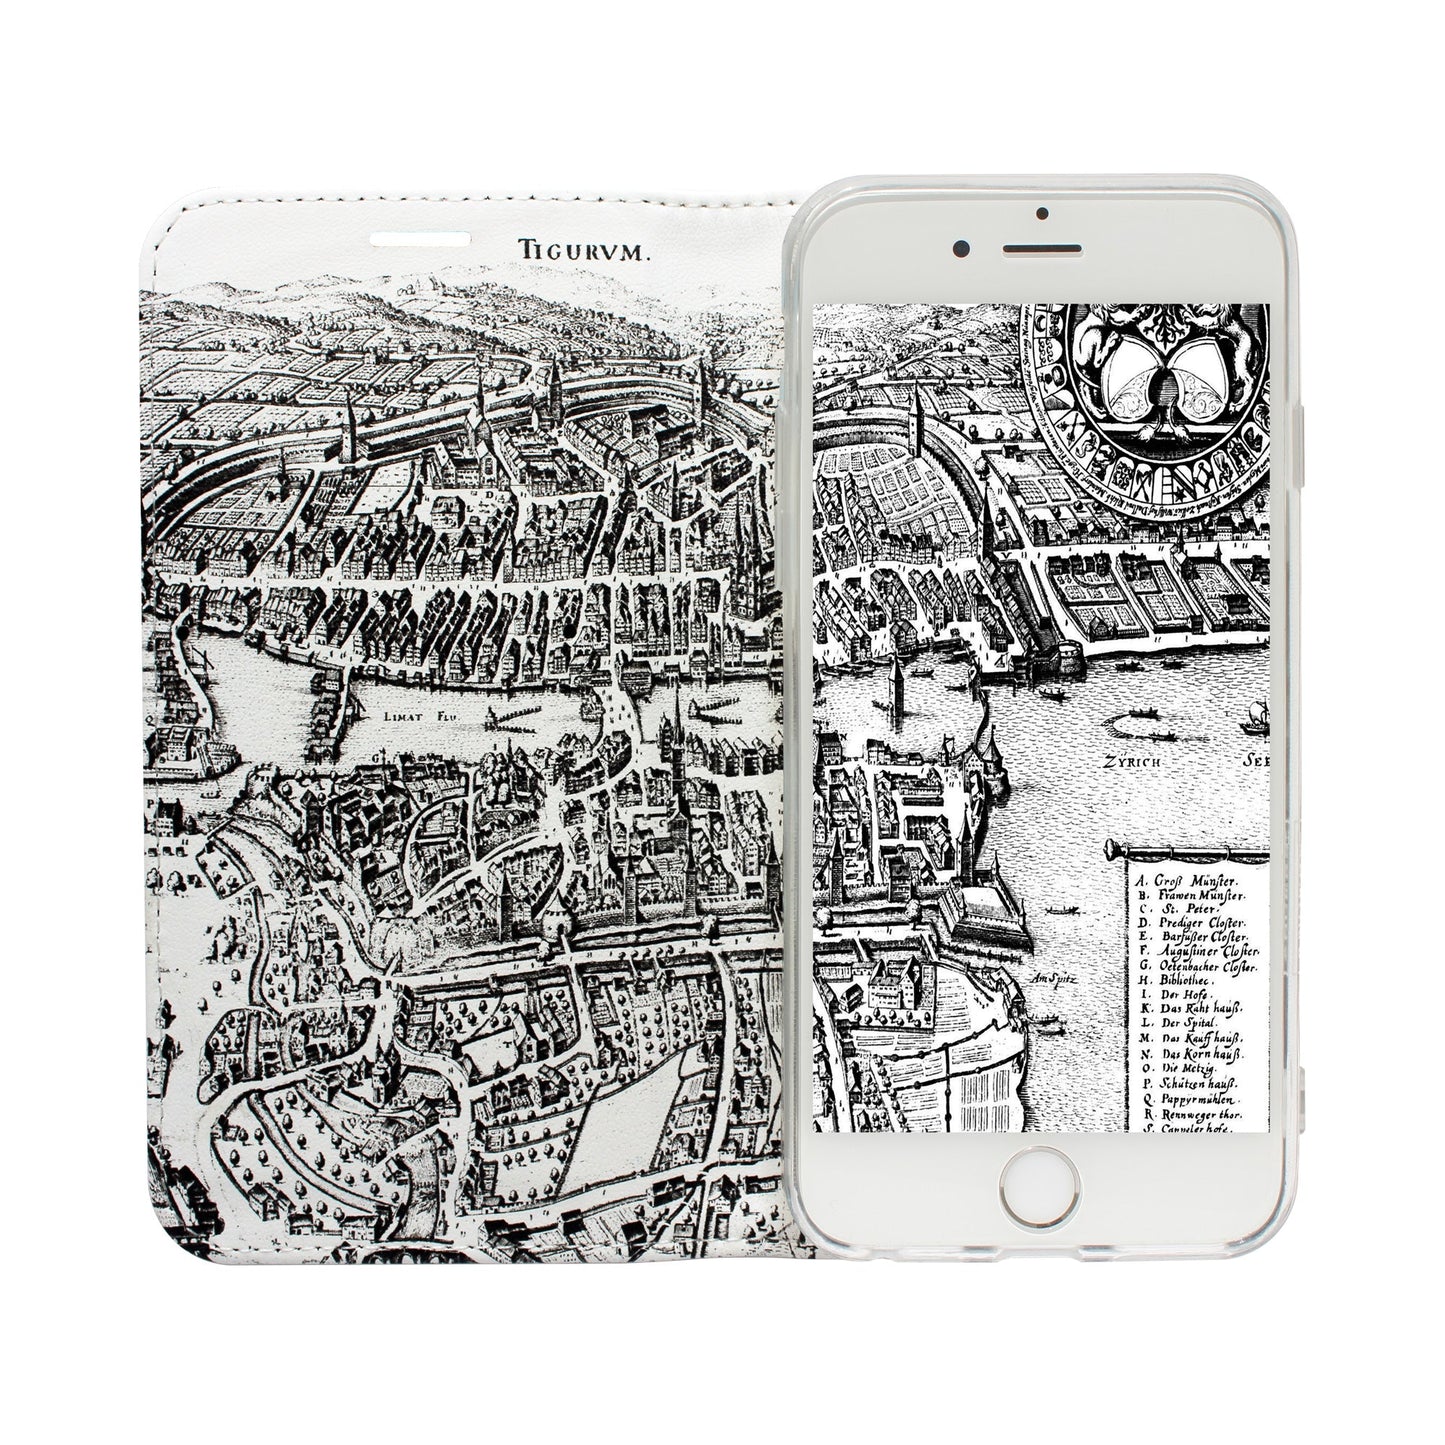 Zurich City from Above Panorama Case for iPhone 5/5S/SE 1